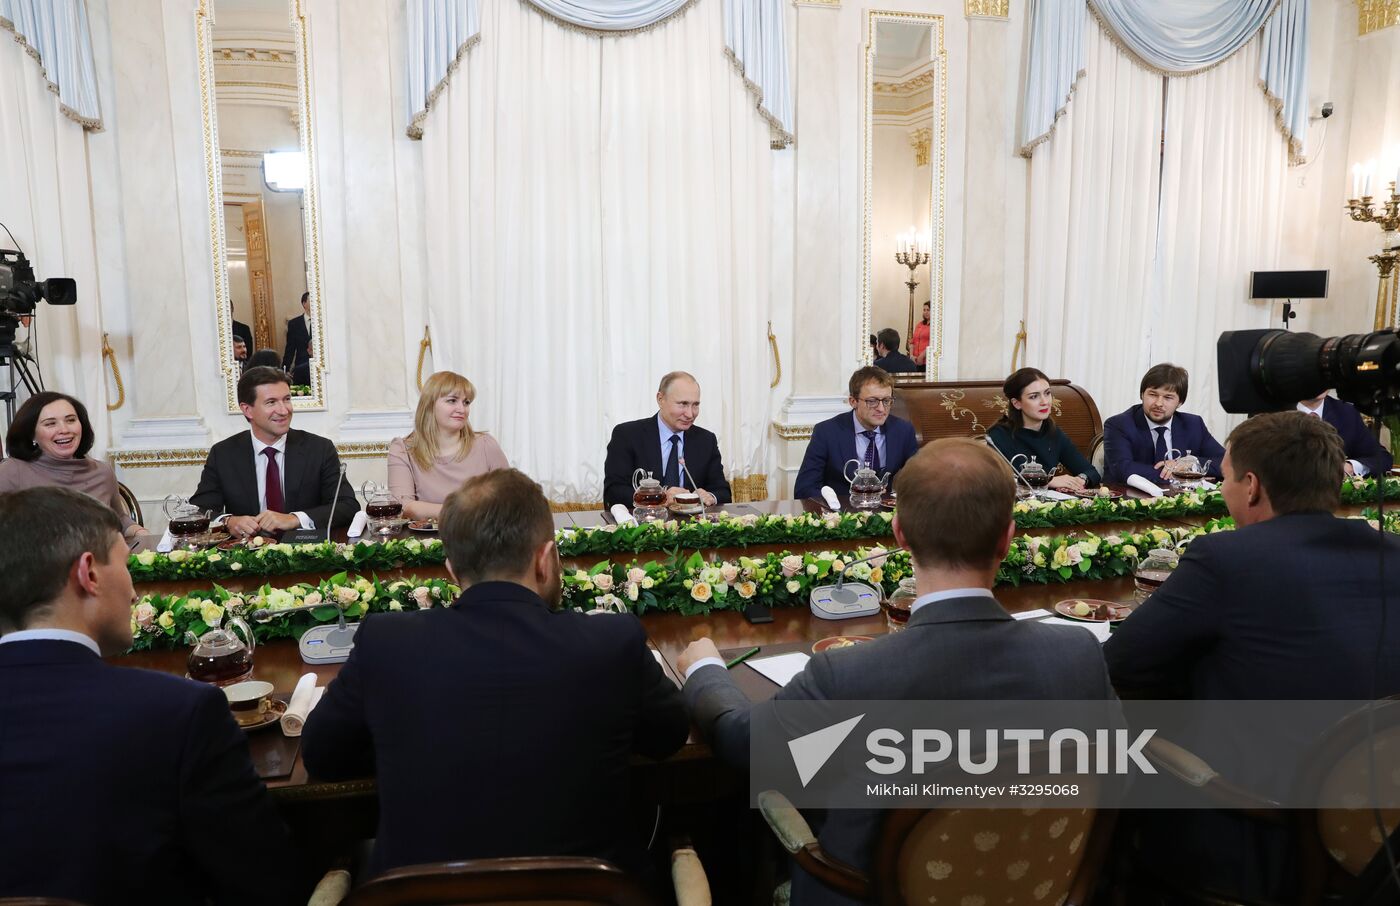 President Vladimir Putin meets with Leaders of Russia contest finalists